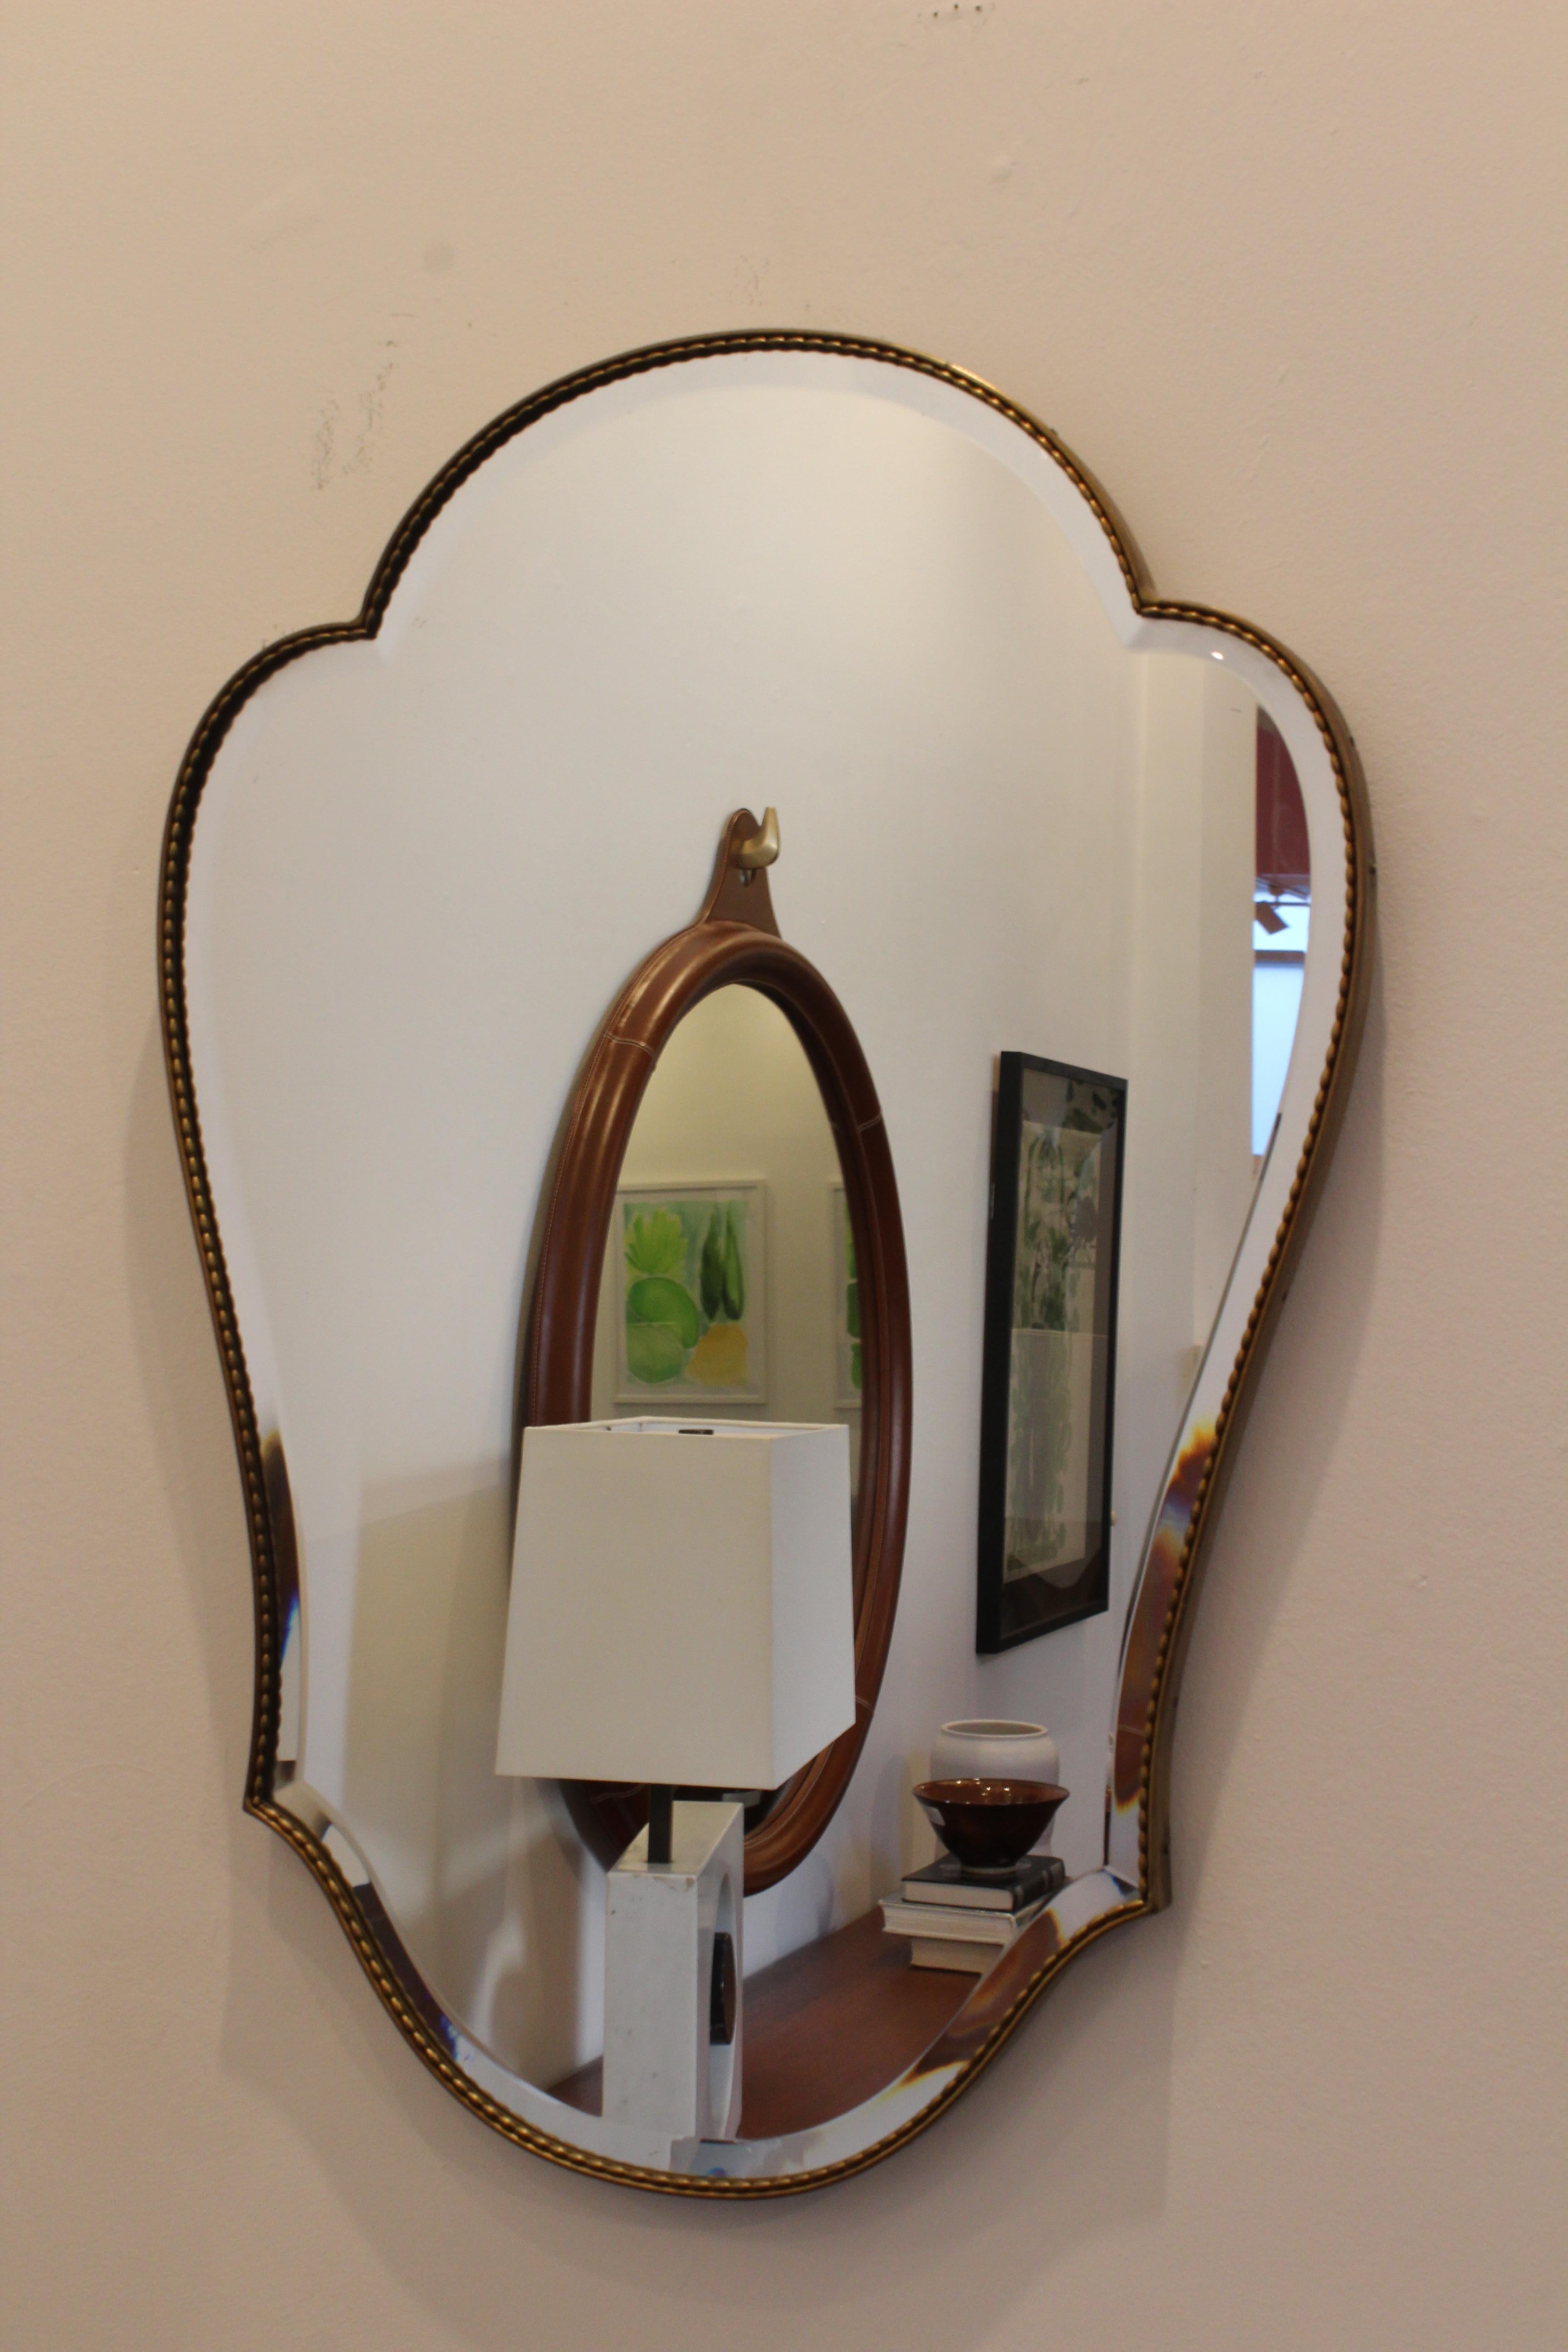 Vintage brass framed mirror with a braided detail along the frame. In good condition with patina.
            